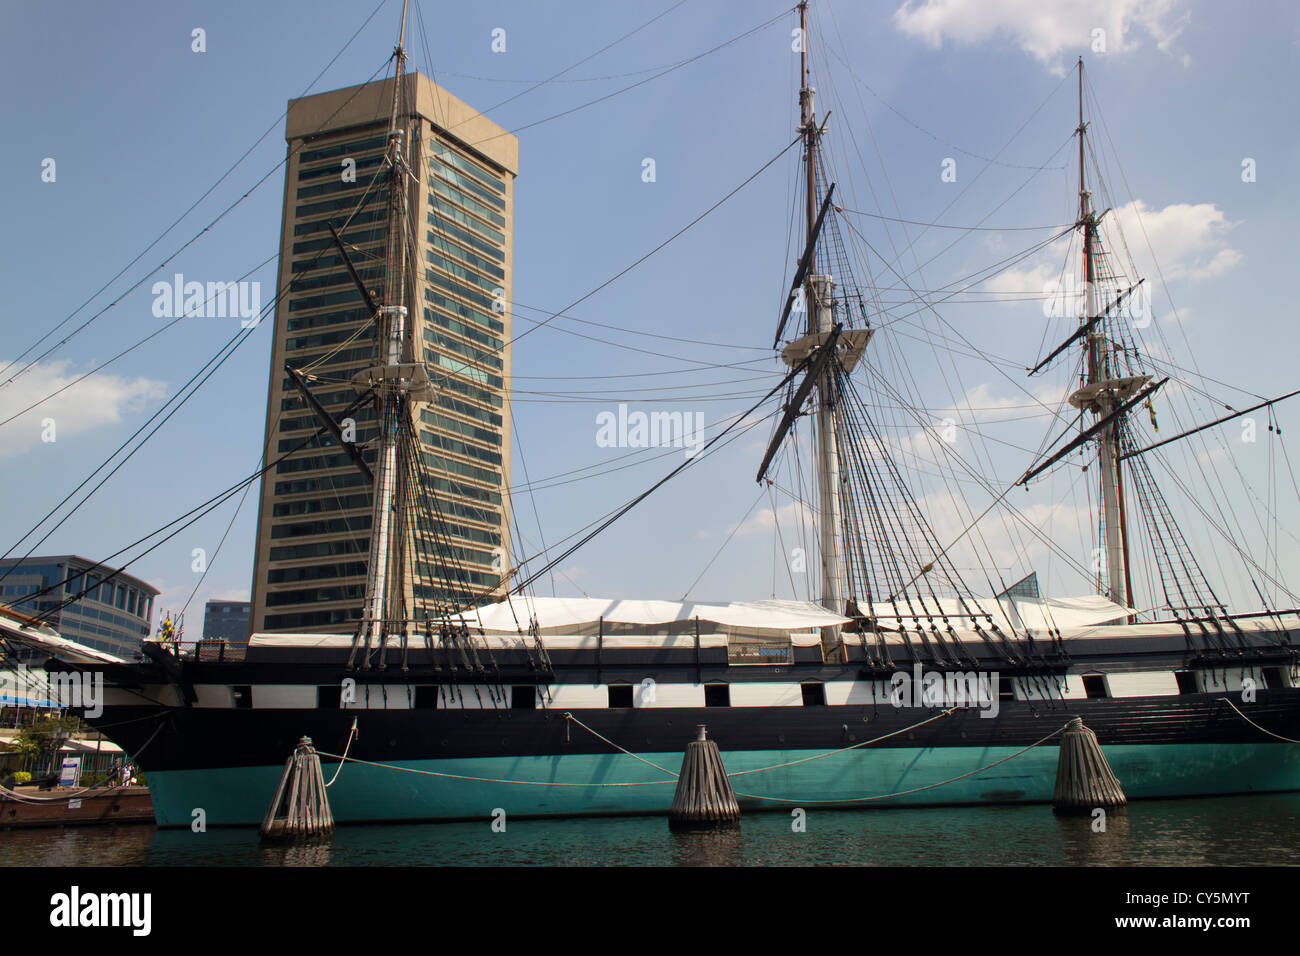 USS Constellation, the last all sail warship built by the US Navy, is open to the public as a museum in Baltimore's Inner Harbor Stock Photo